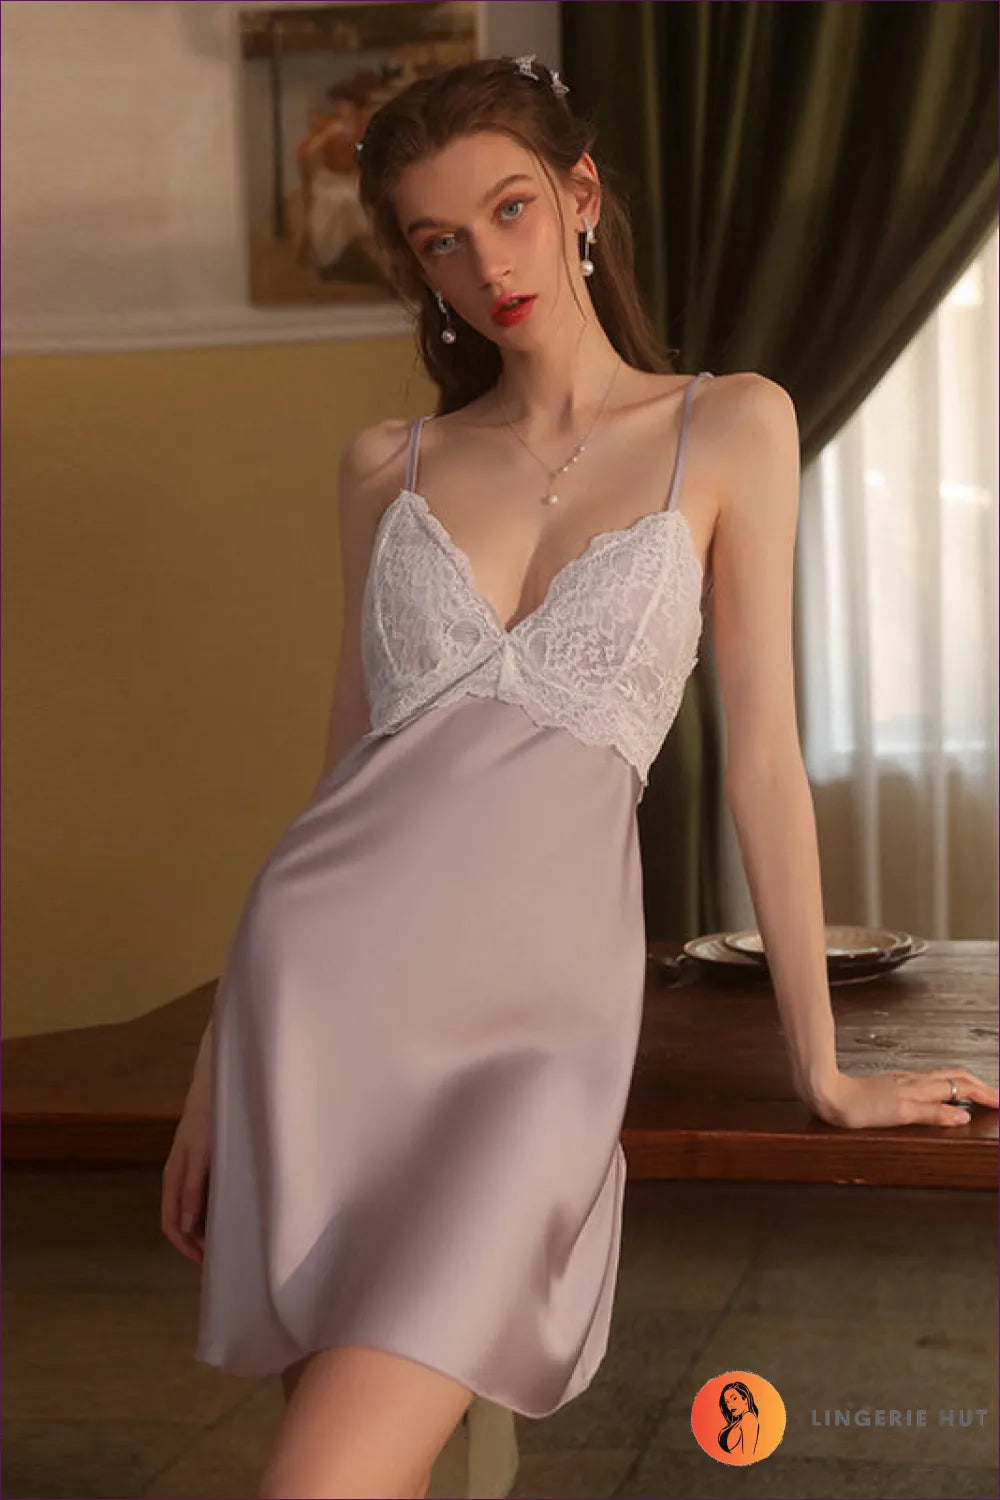 Elevate Your Look With Our Satin Backless Nightdress. Classic Satin Finish, V-neckline, Lace Trim,